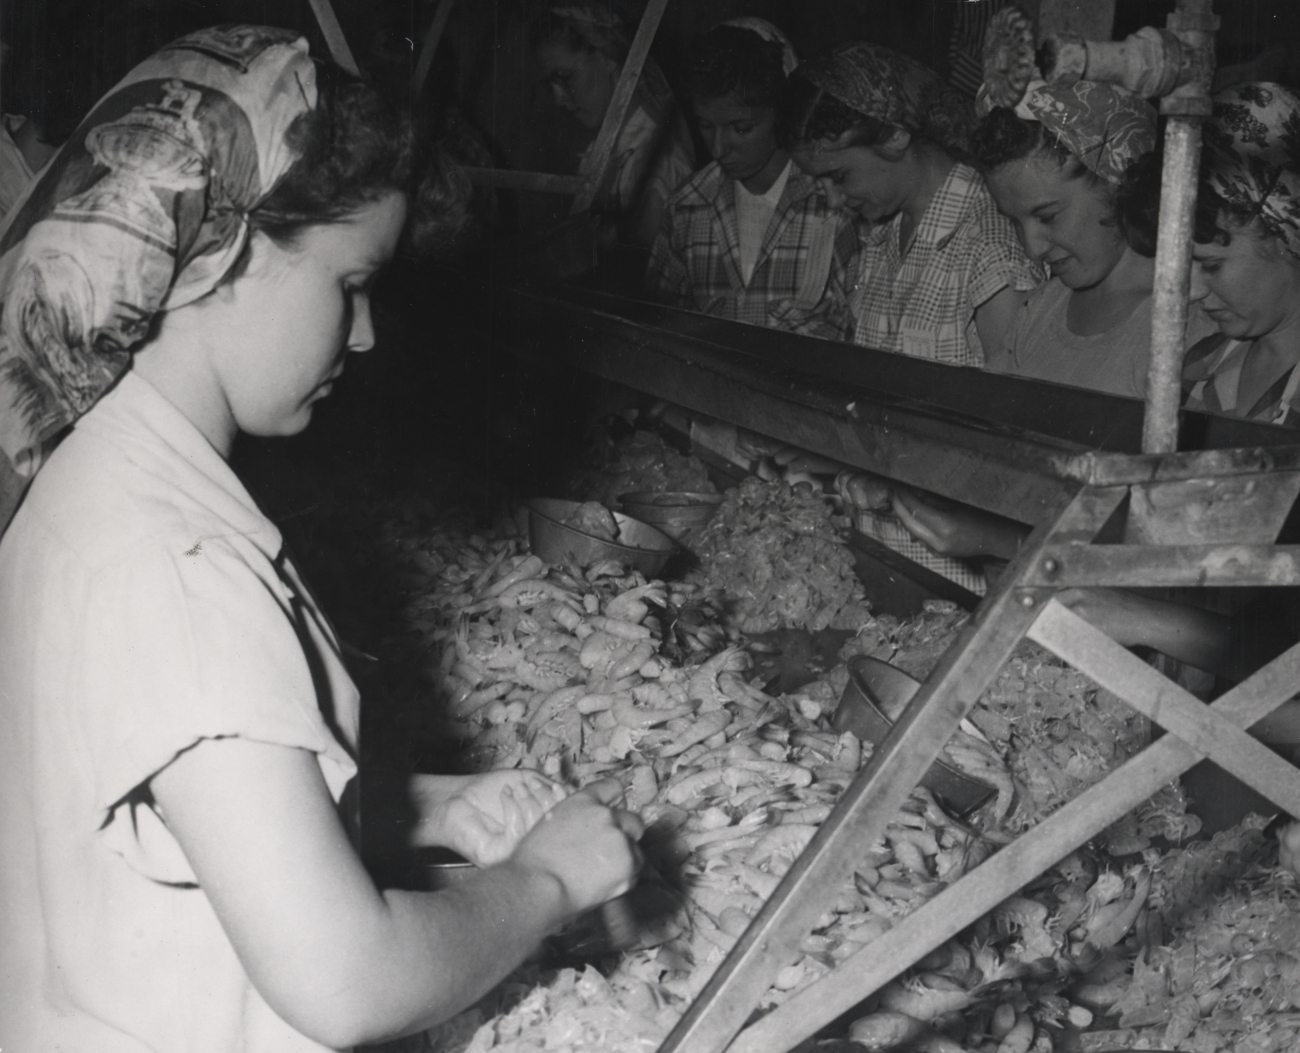 Women on assembly line at shrimp processing plant